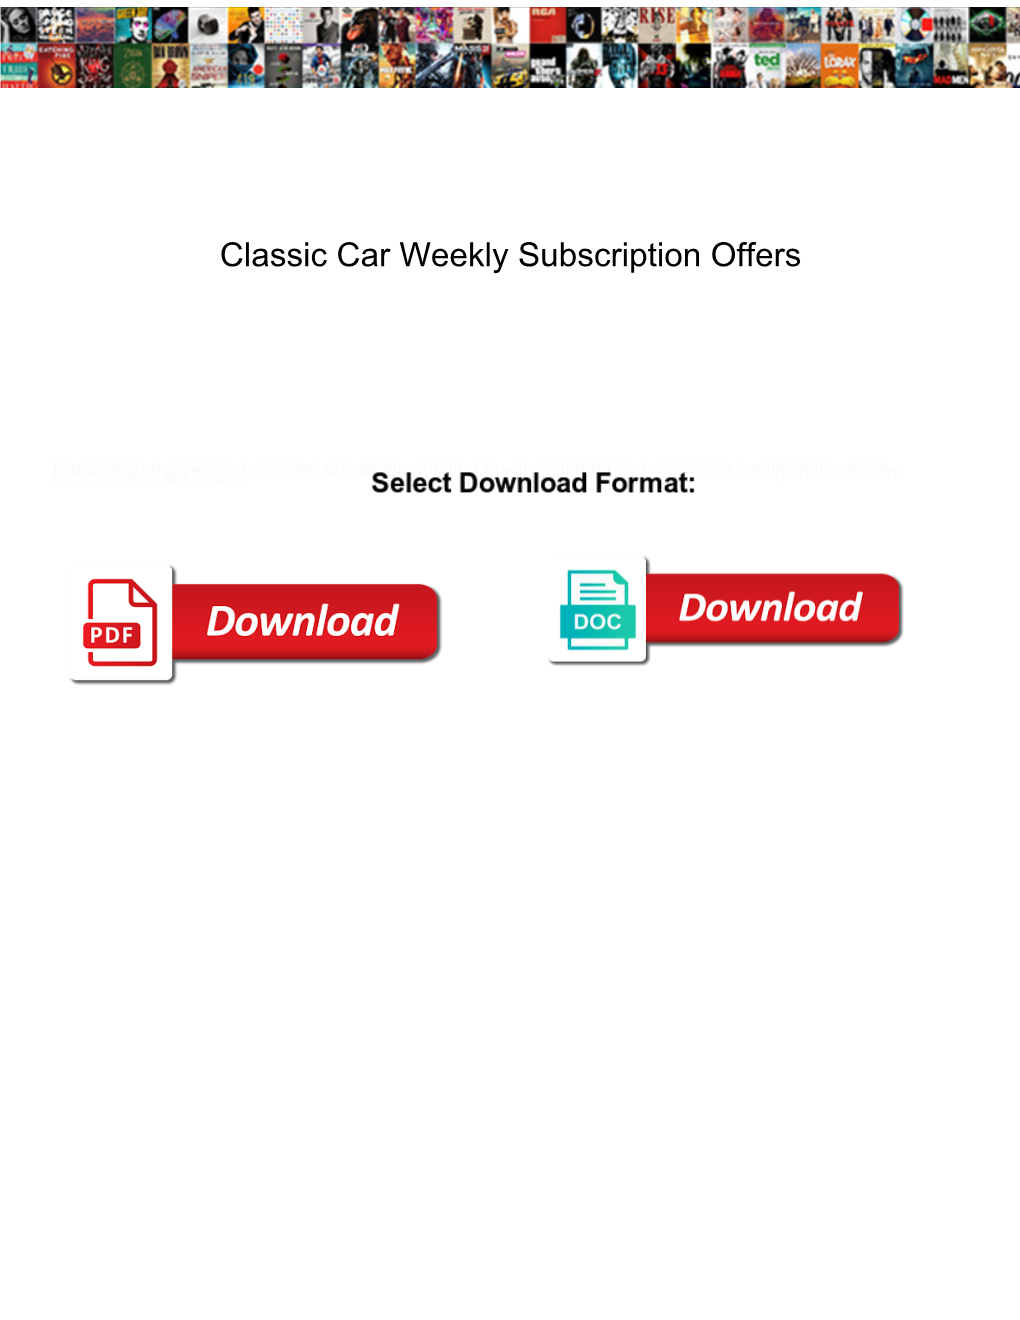 Classic Car Weekly Subscription Offers